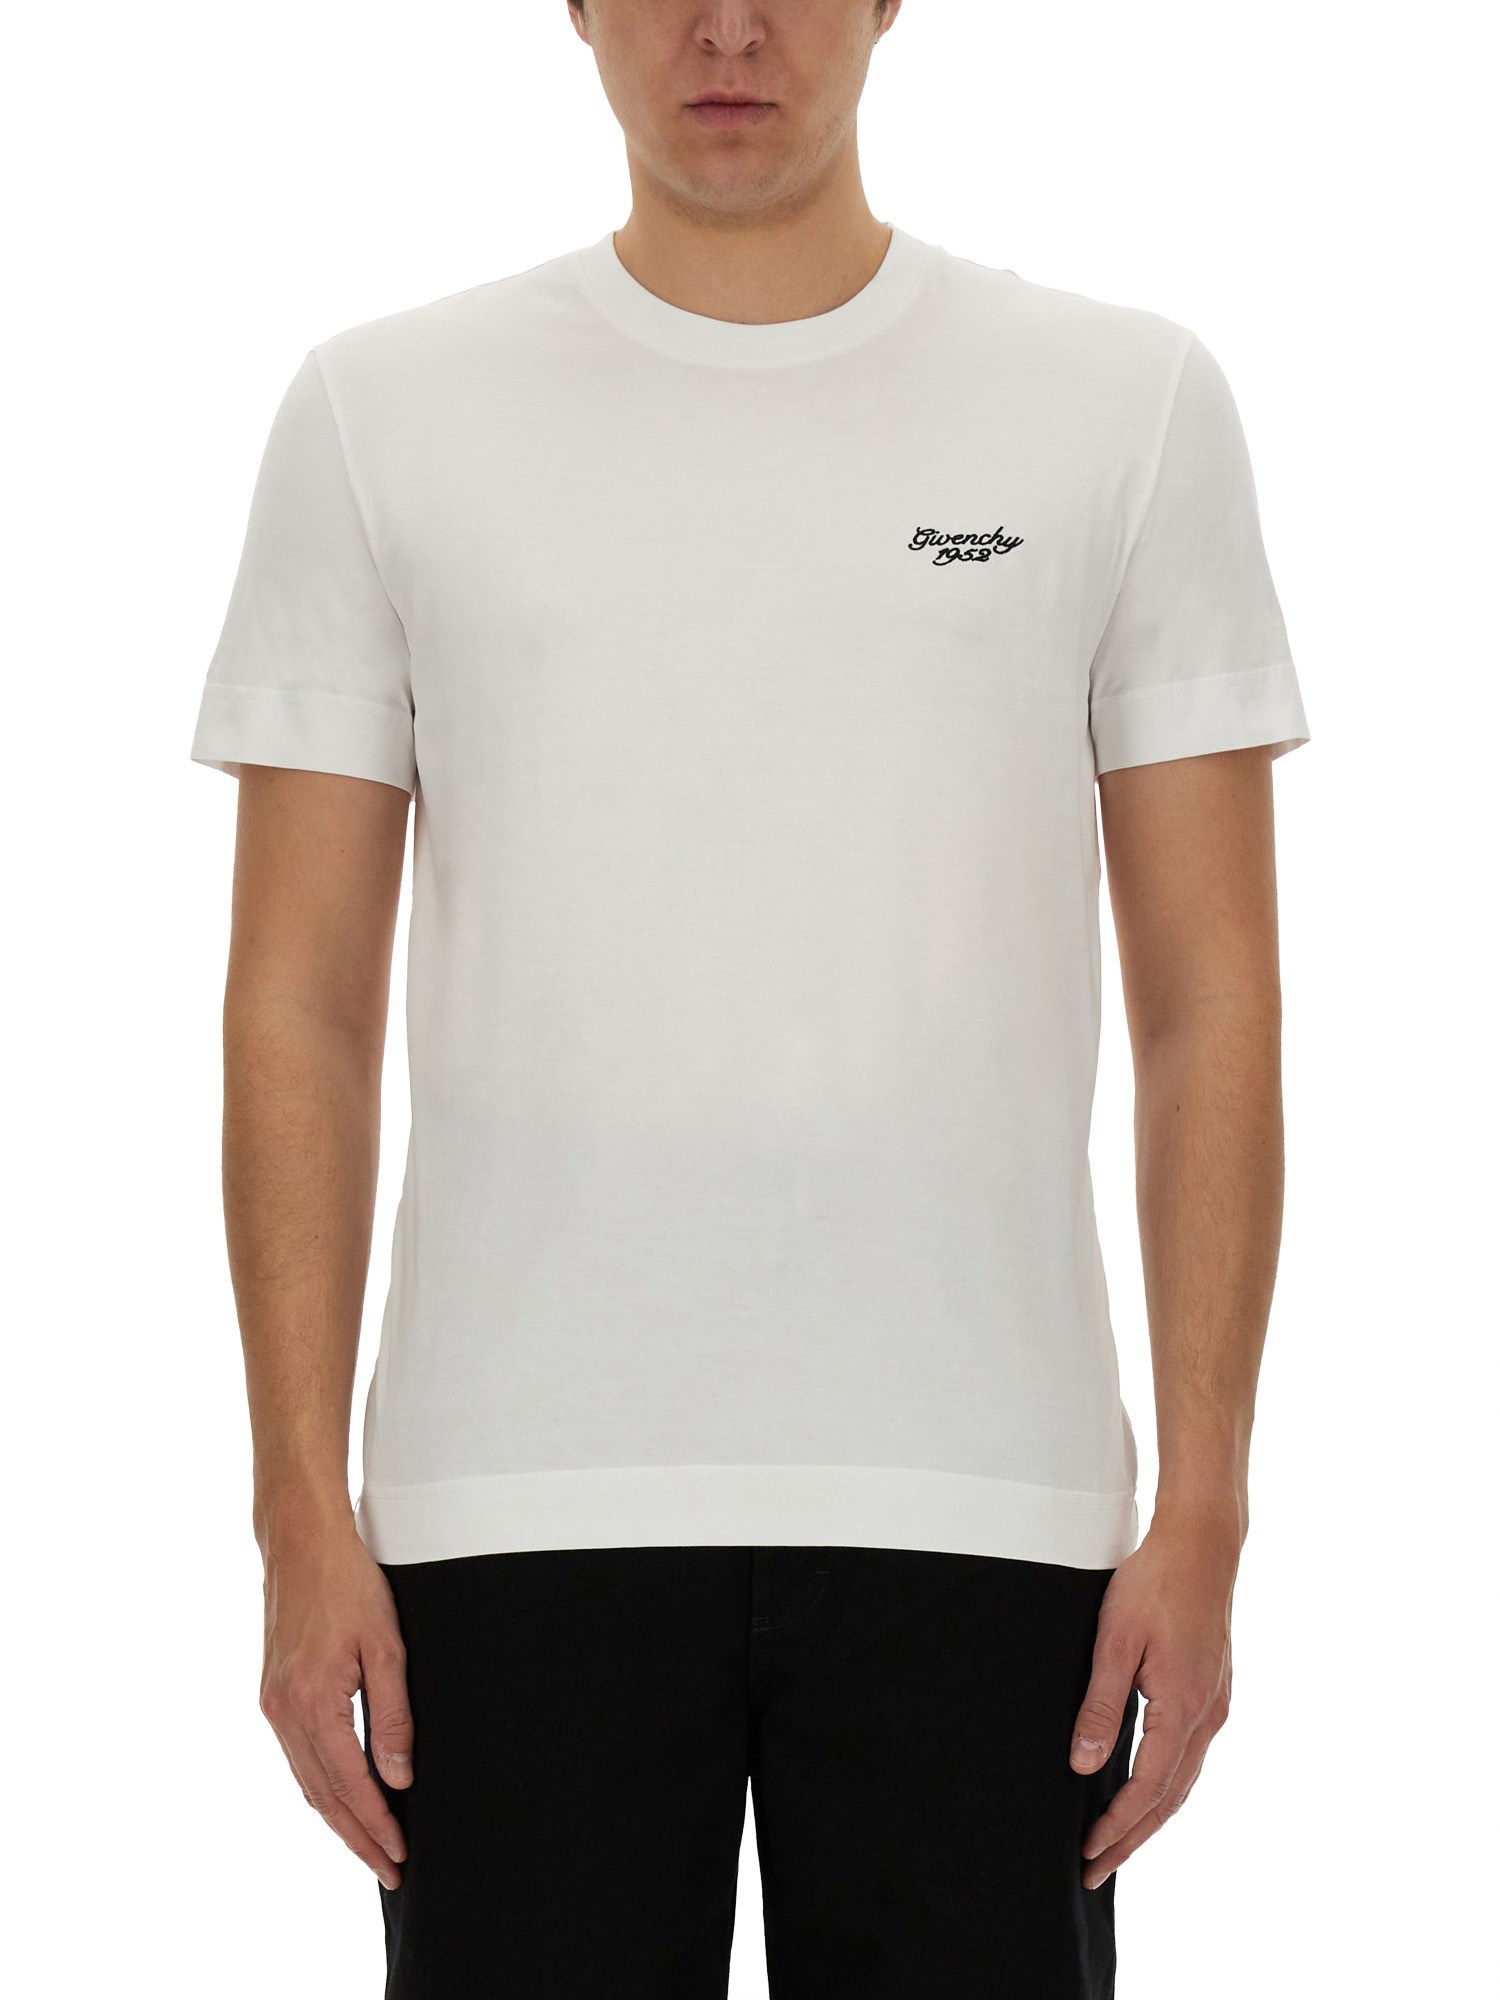 givenchy slim fit t-shirt